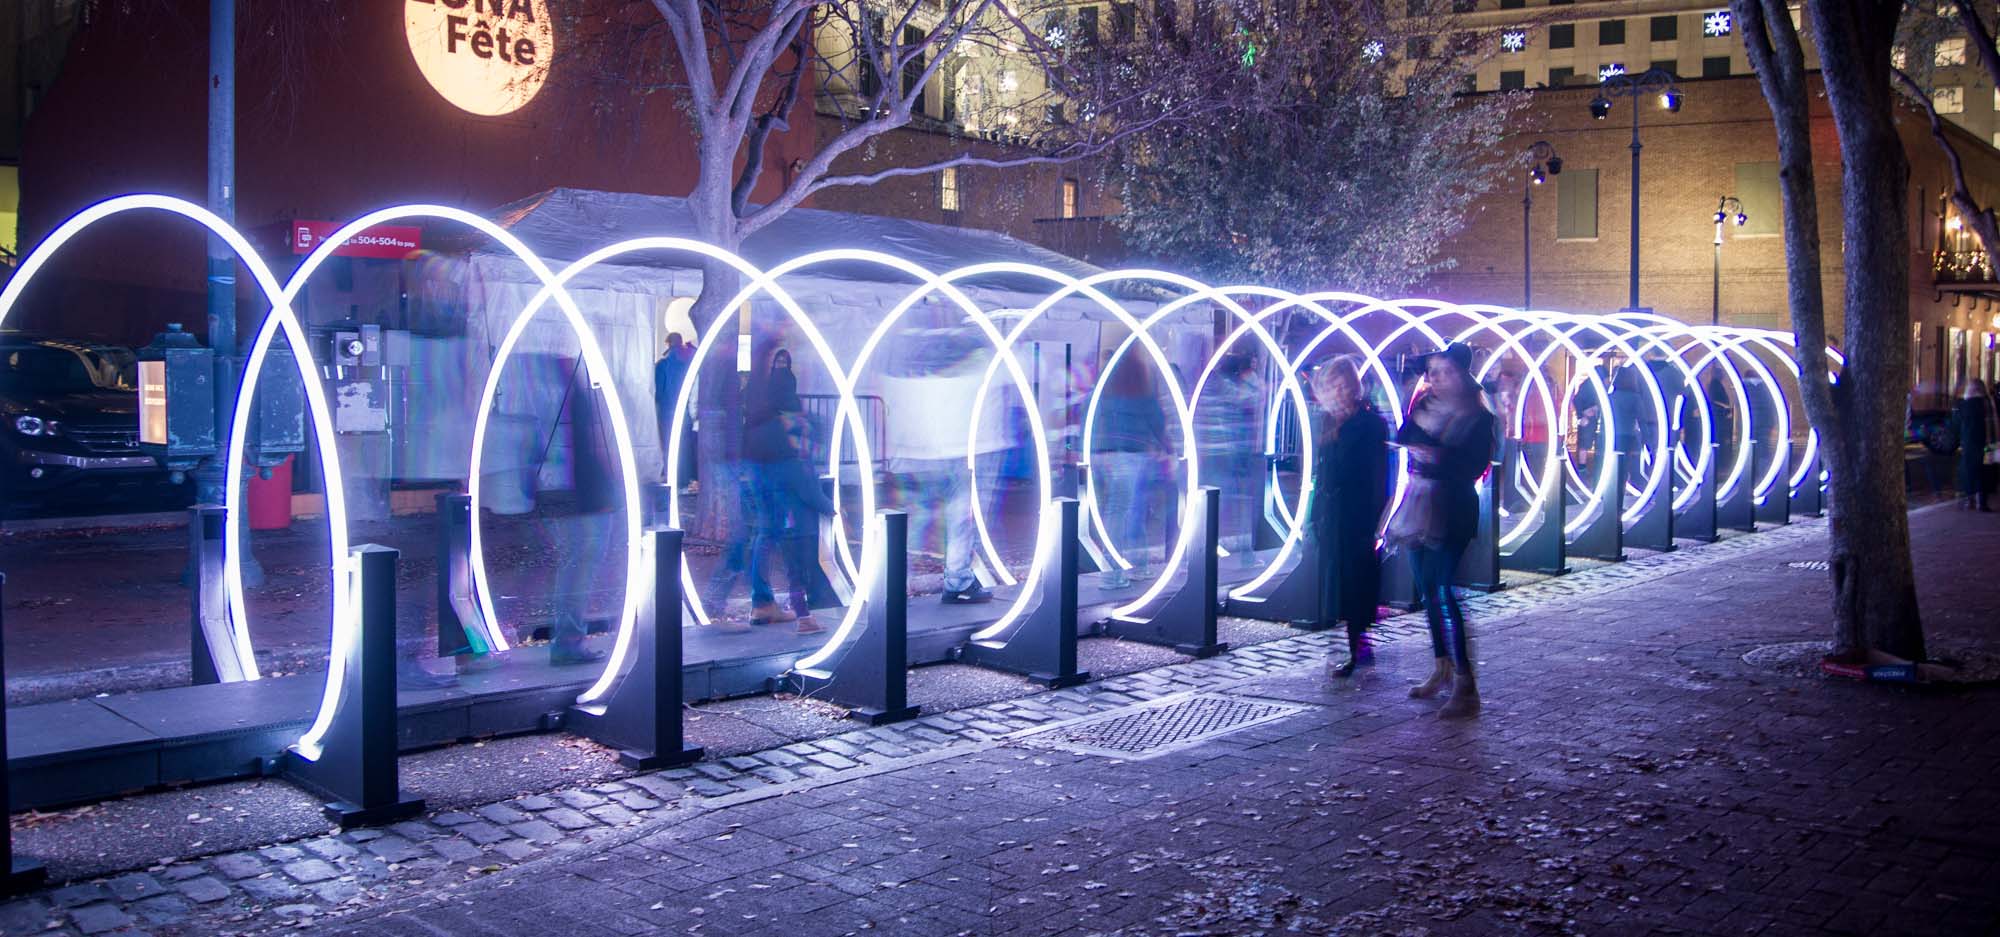 Outdoor art installations that are a lit up tube to walk through at night.